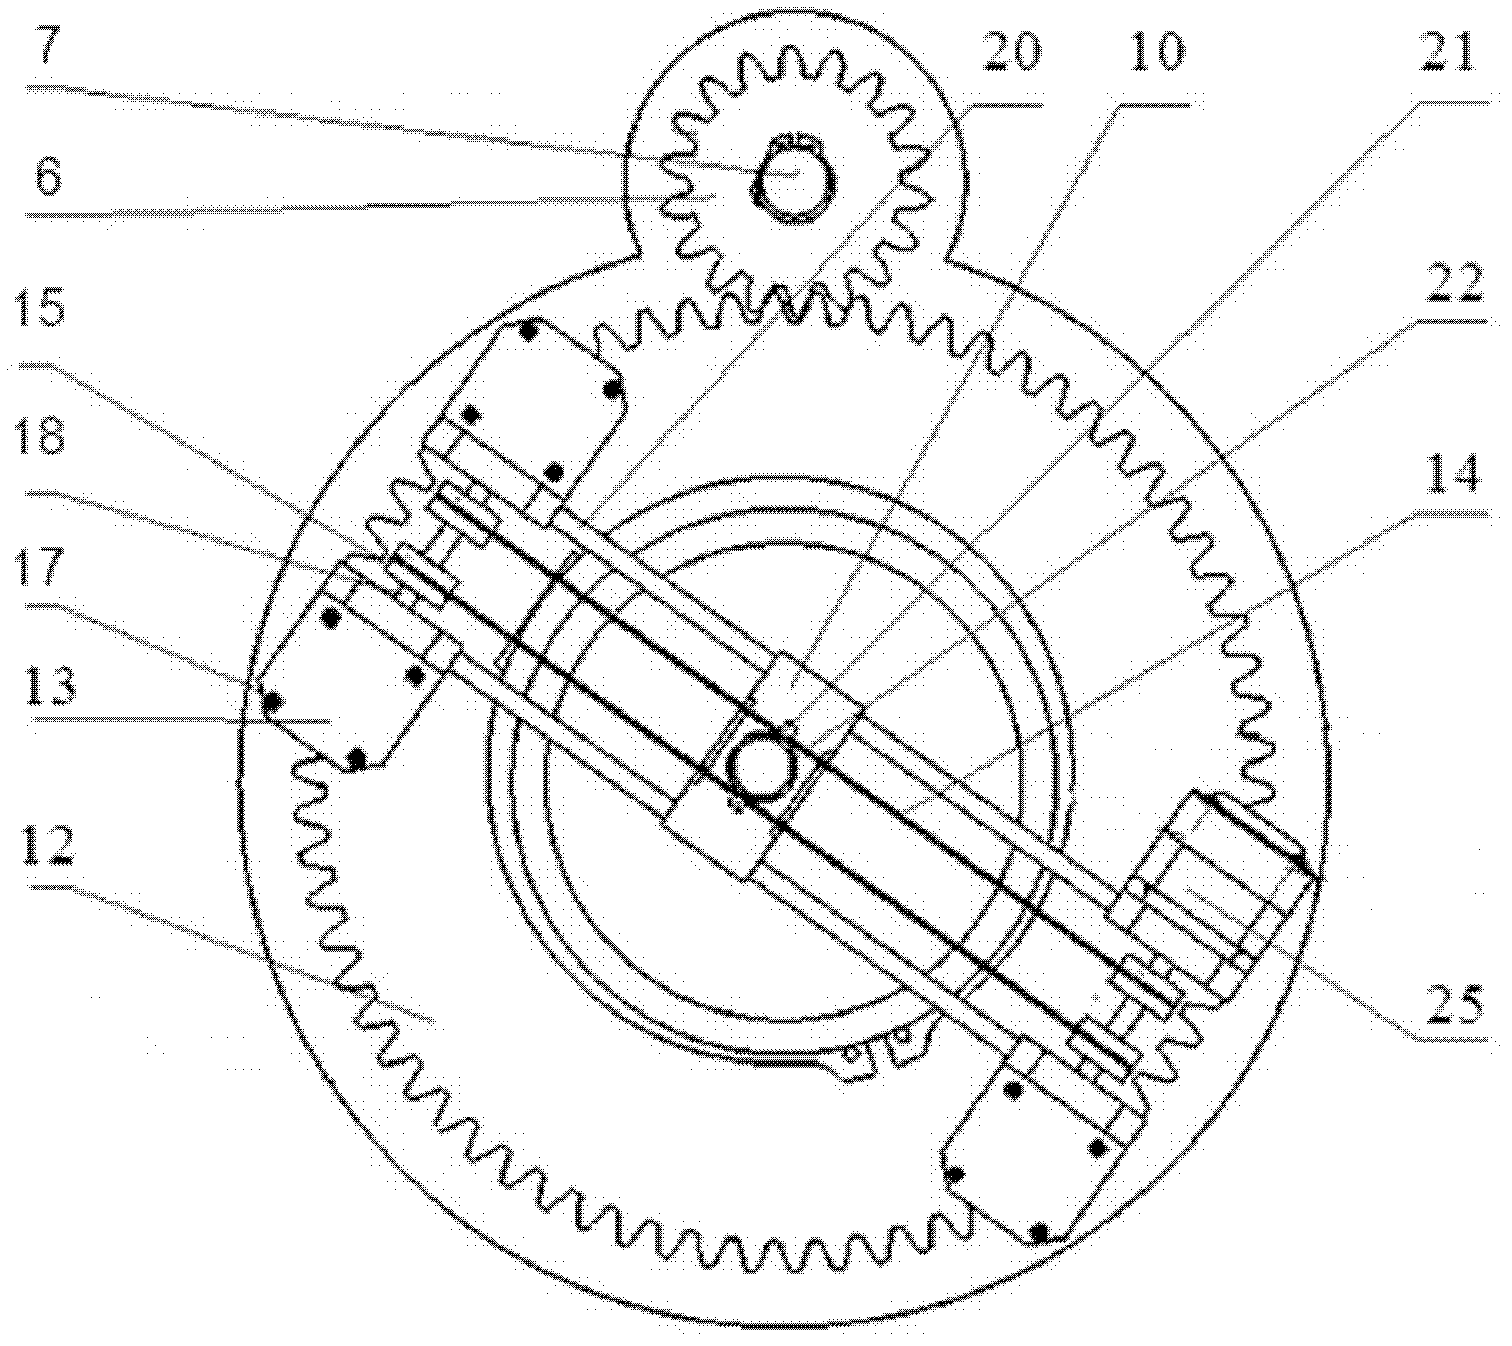 Acupuncture manipulator mechanism for nuclear magnetic resonance environment